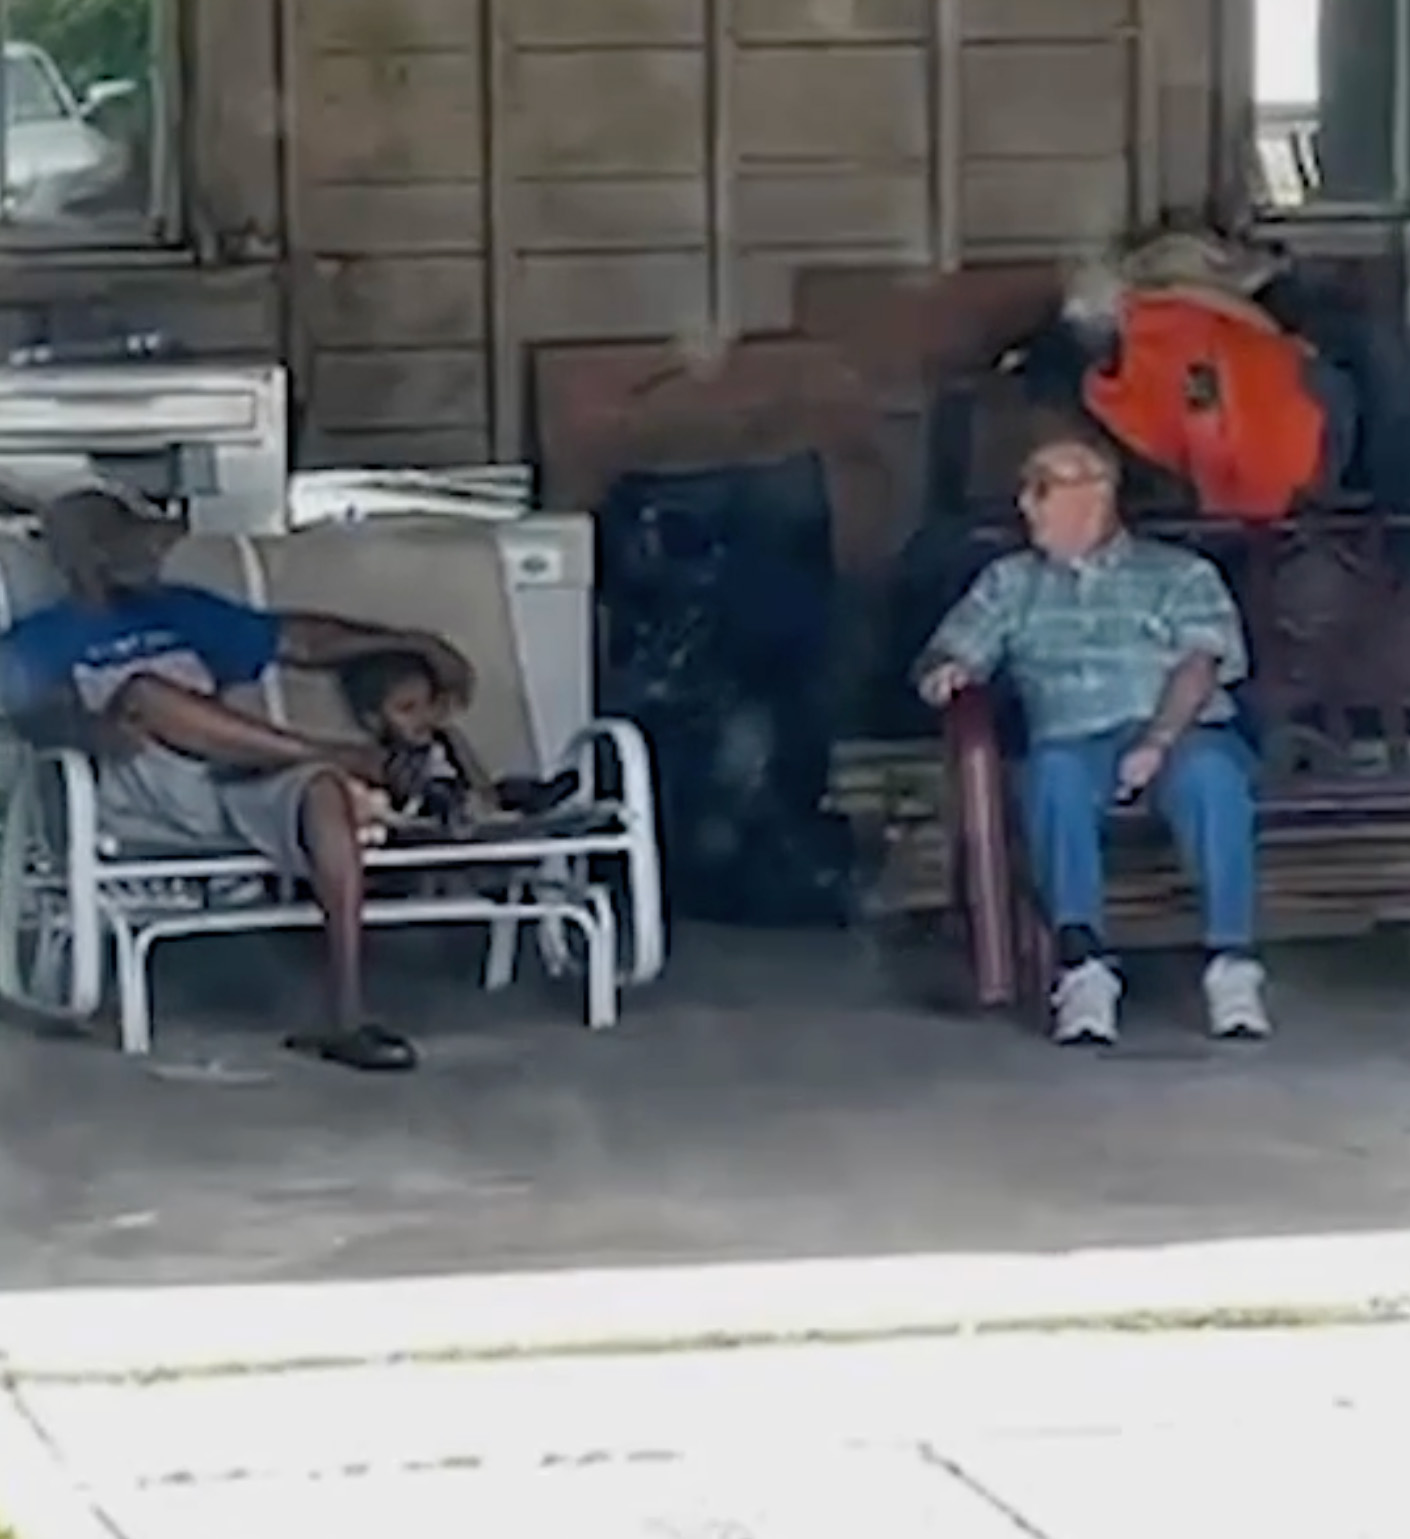 Family Of 7 Finds A Grandpa In Their 82 Y.O. Neighbor Living Next To Their New House